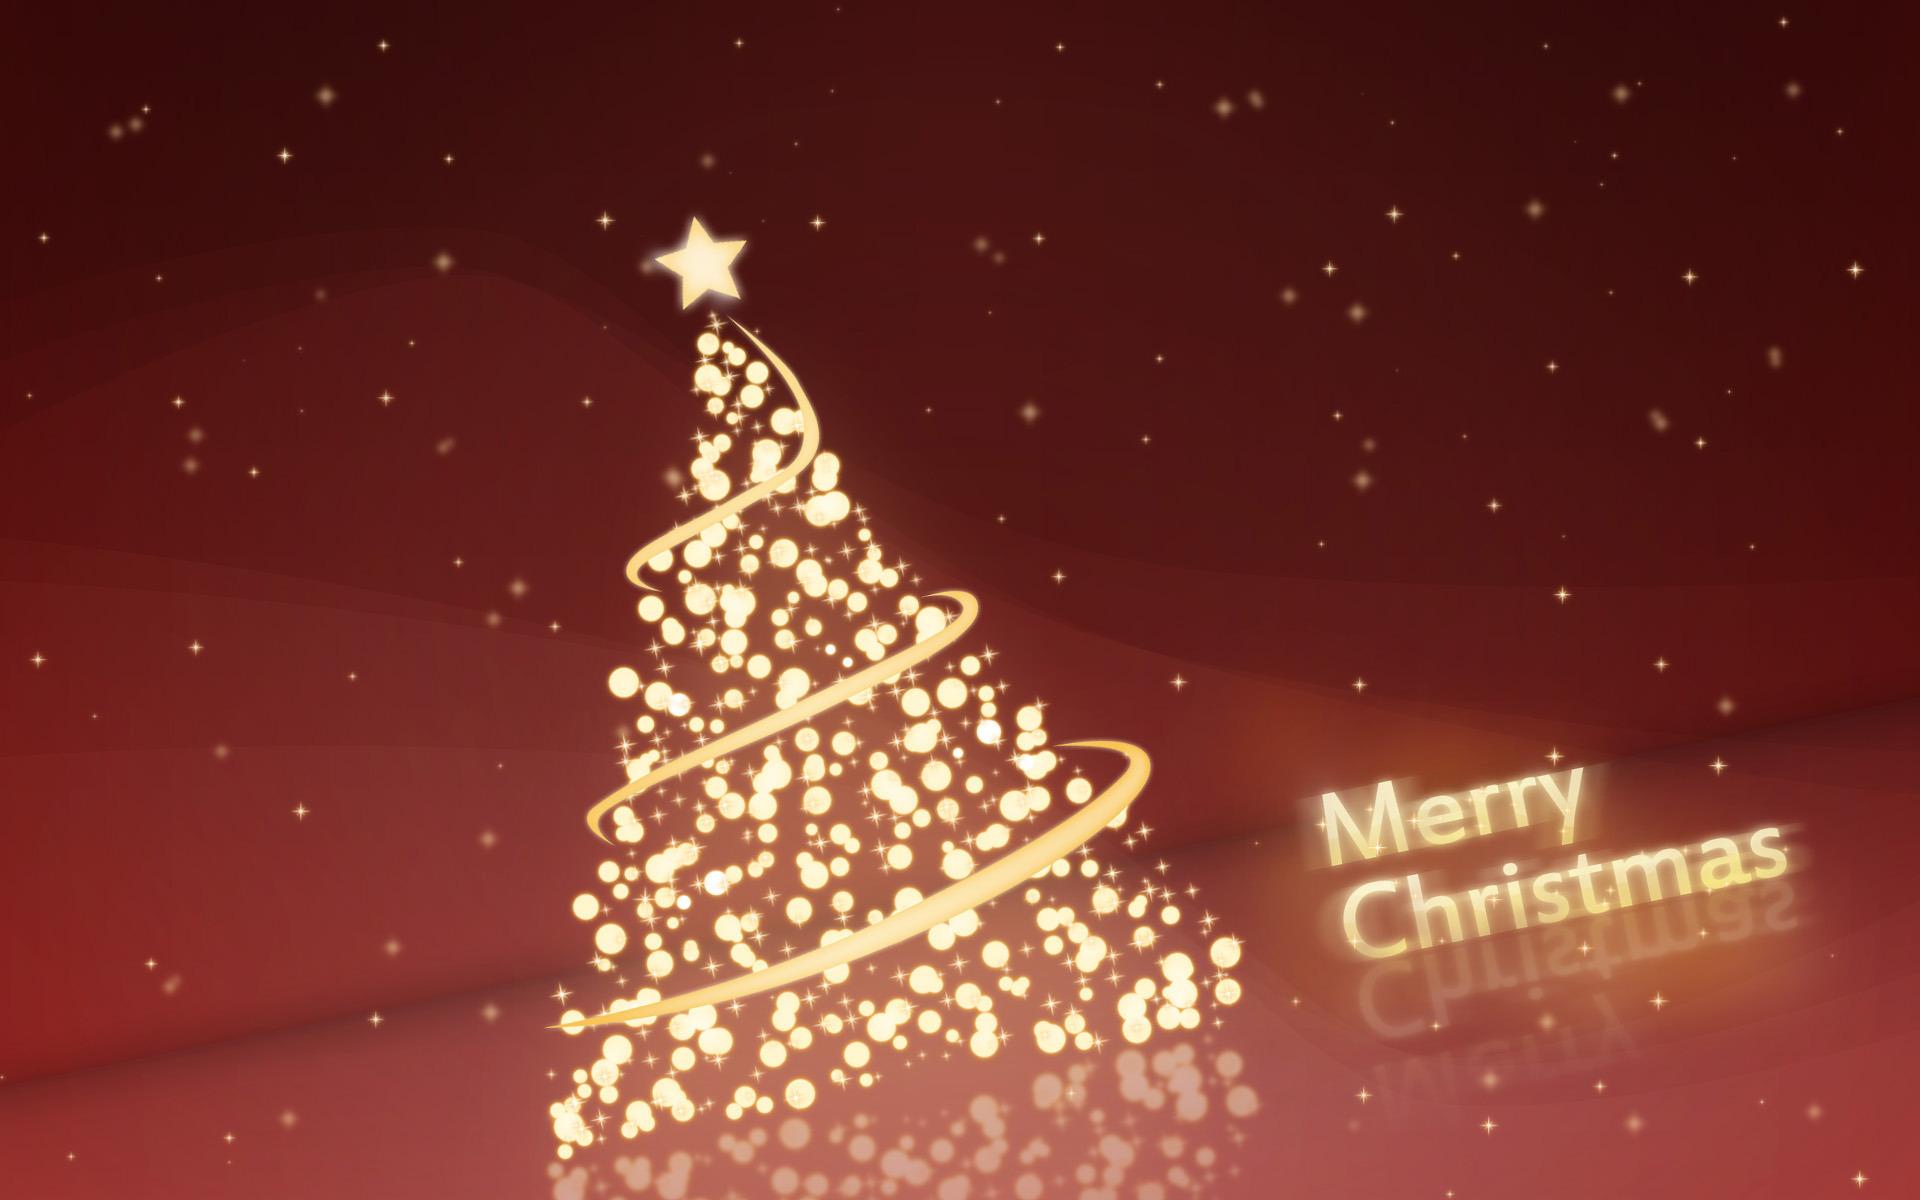  textures, New Year, Christmas texture, Christmas and New Year texture background